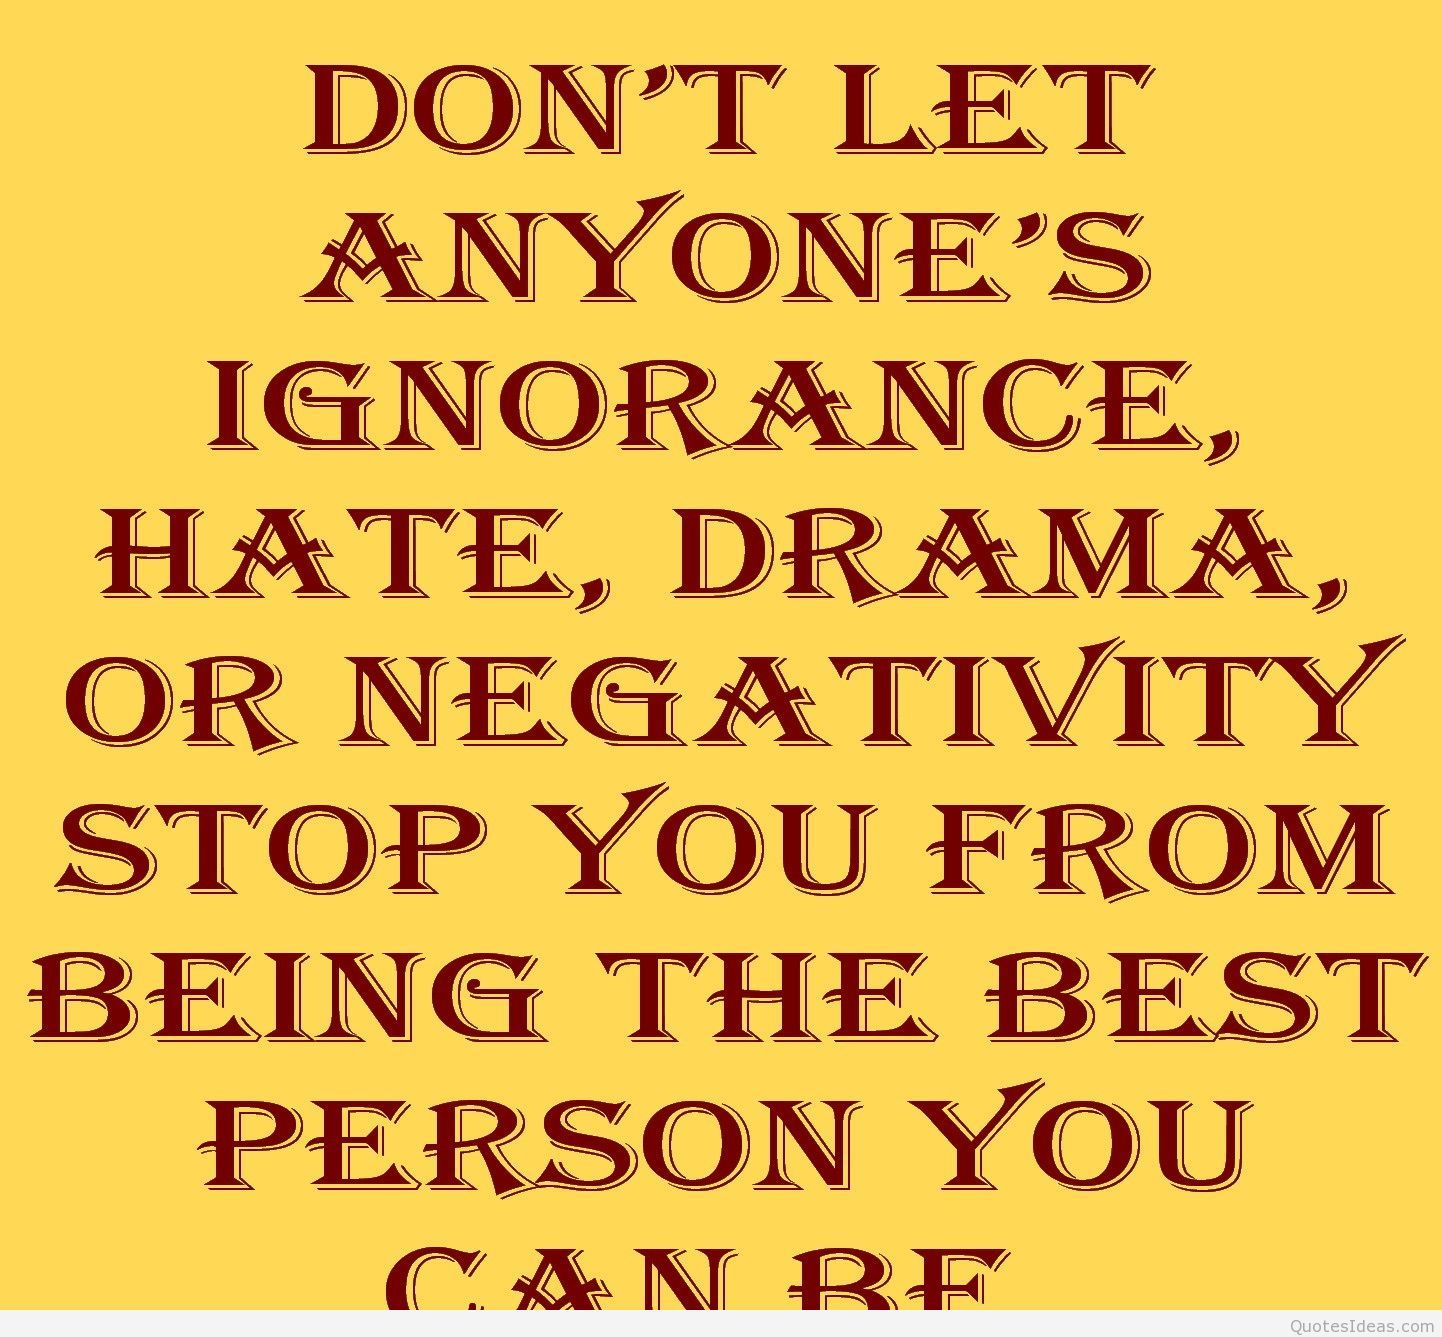 Best ignore ignorance quotes with picture 2015 2016